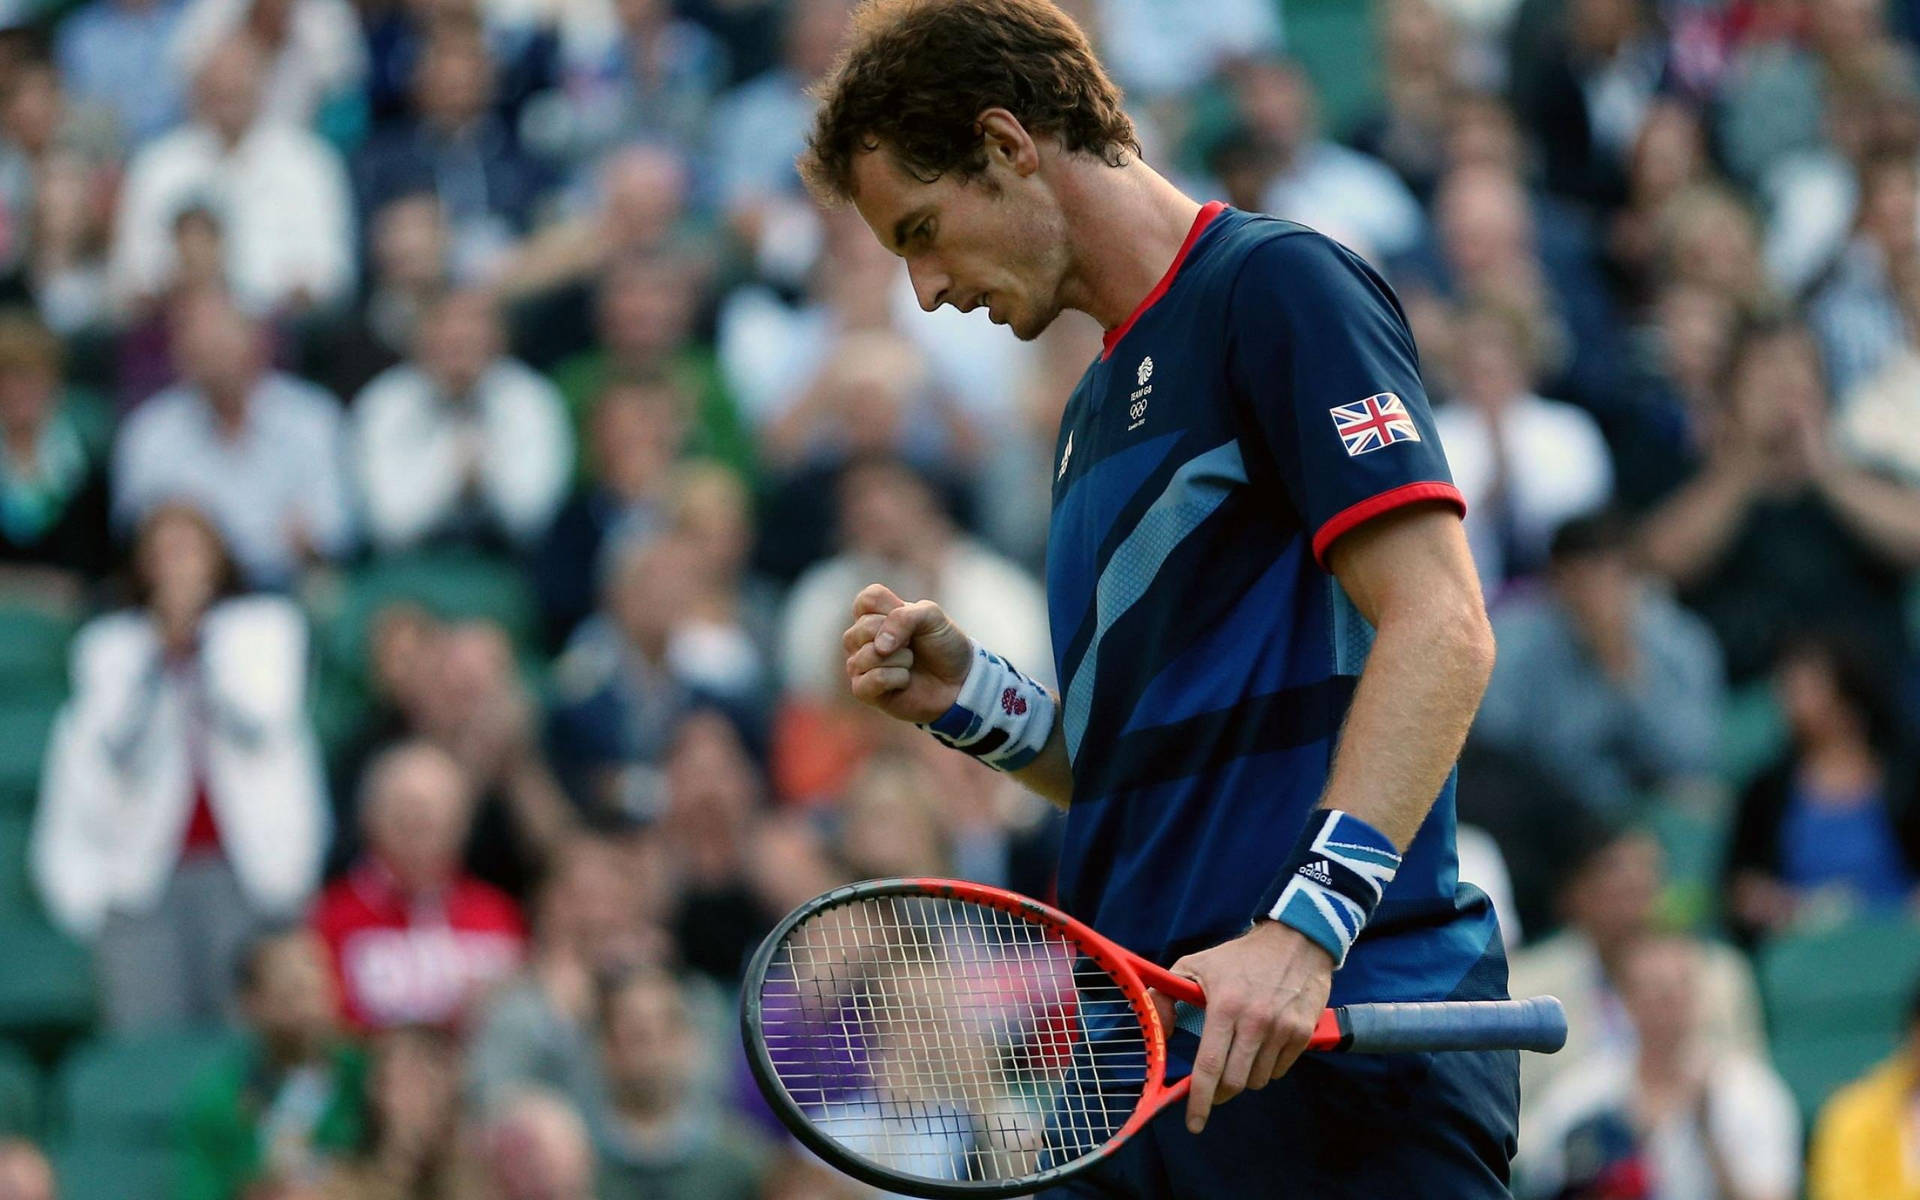 A Reflective Moment With Andy Murray Background